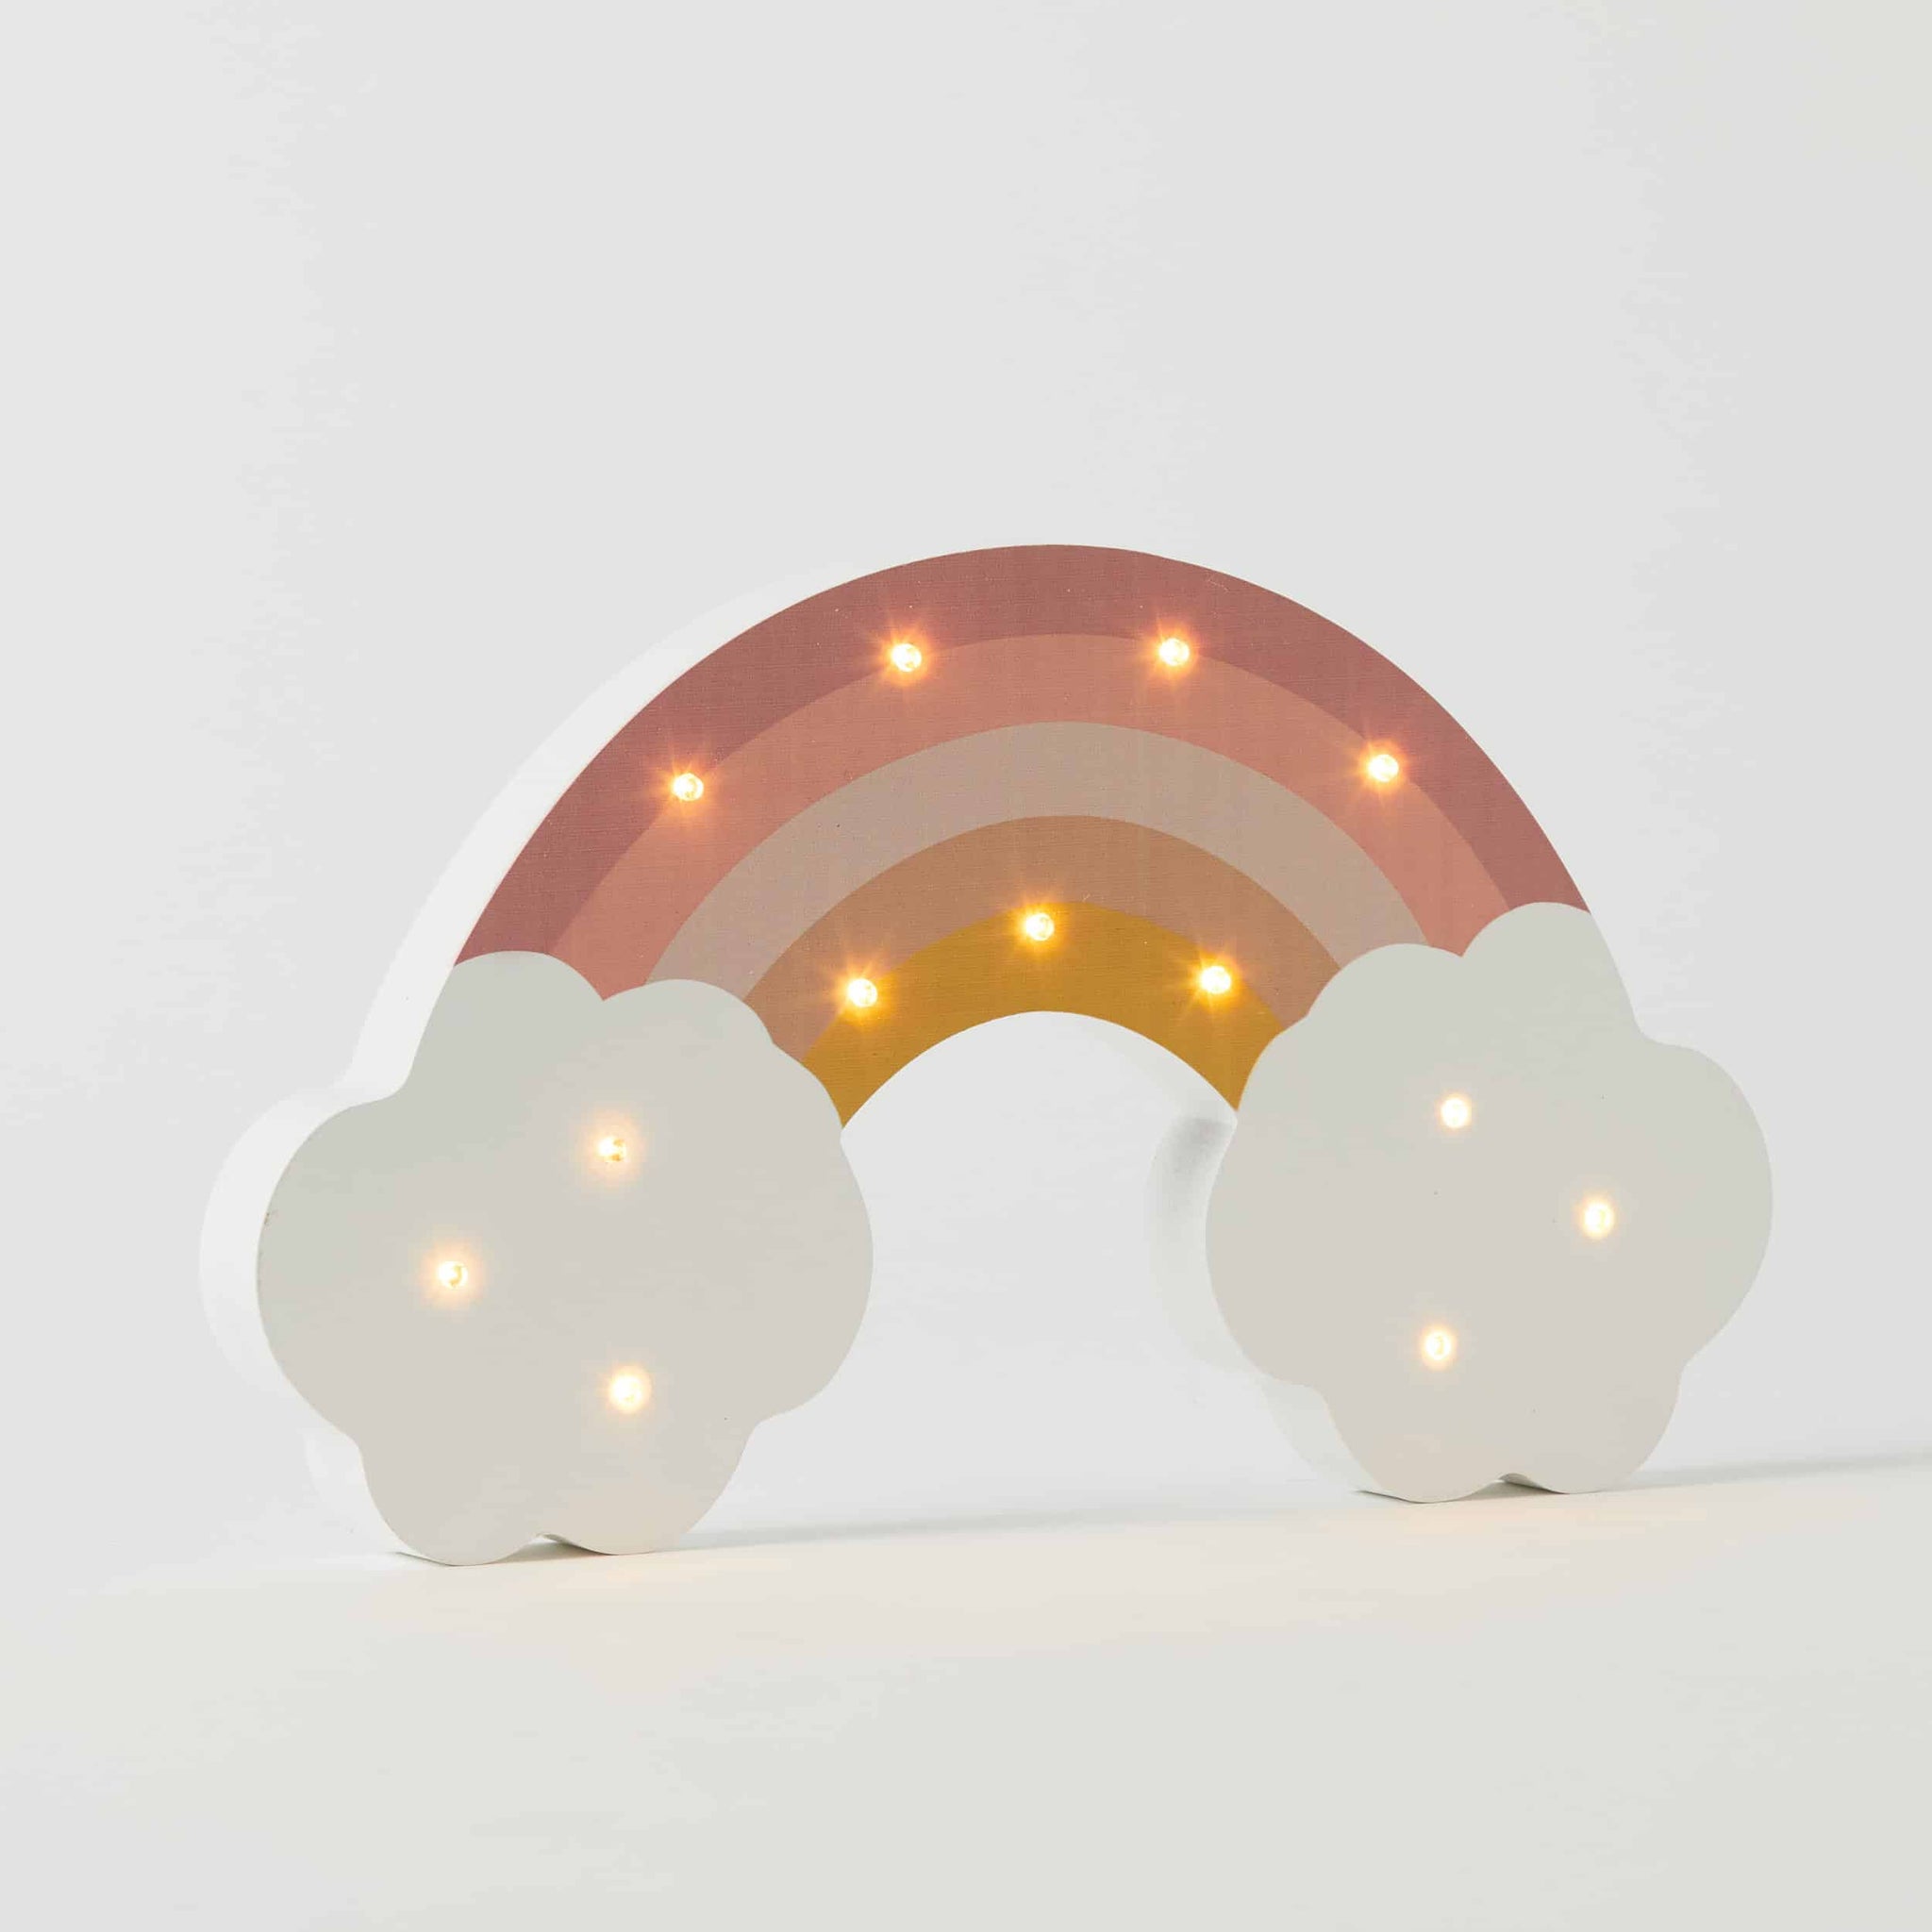 Wooden Marque Light up Shapes